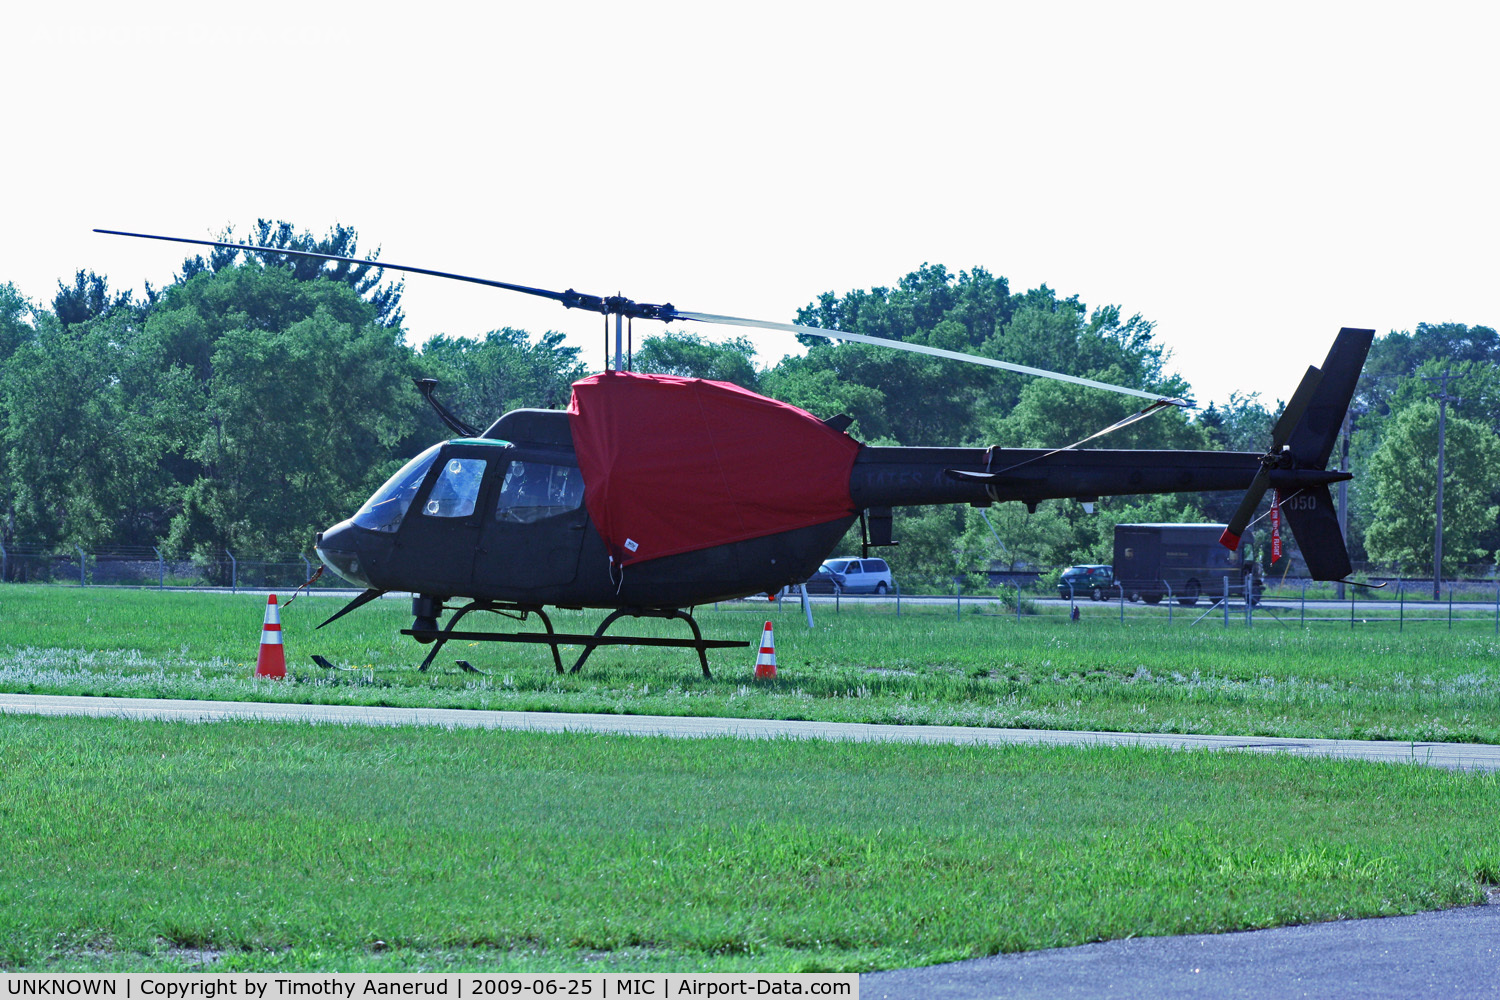 UNKNOWN, Helicopters Various C/N unknown, OH-58 visitor